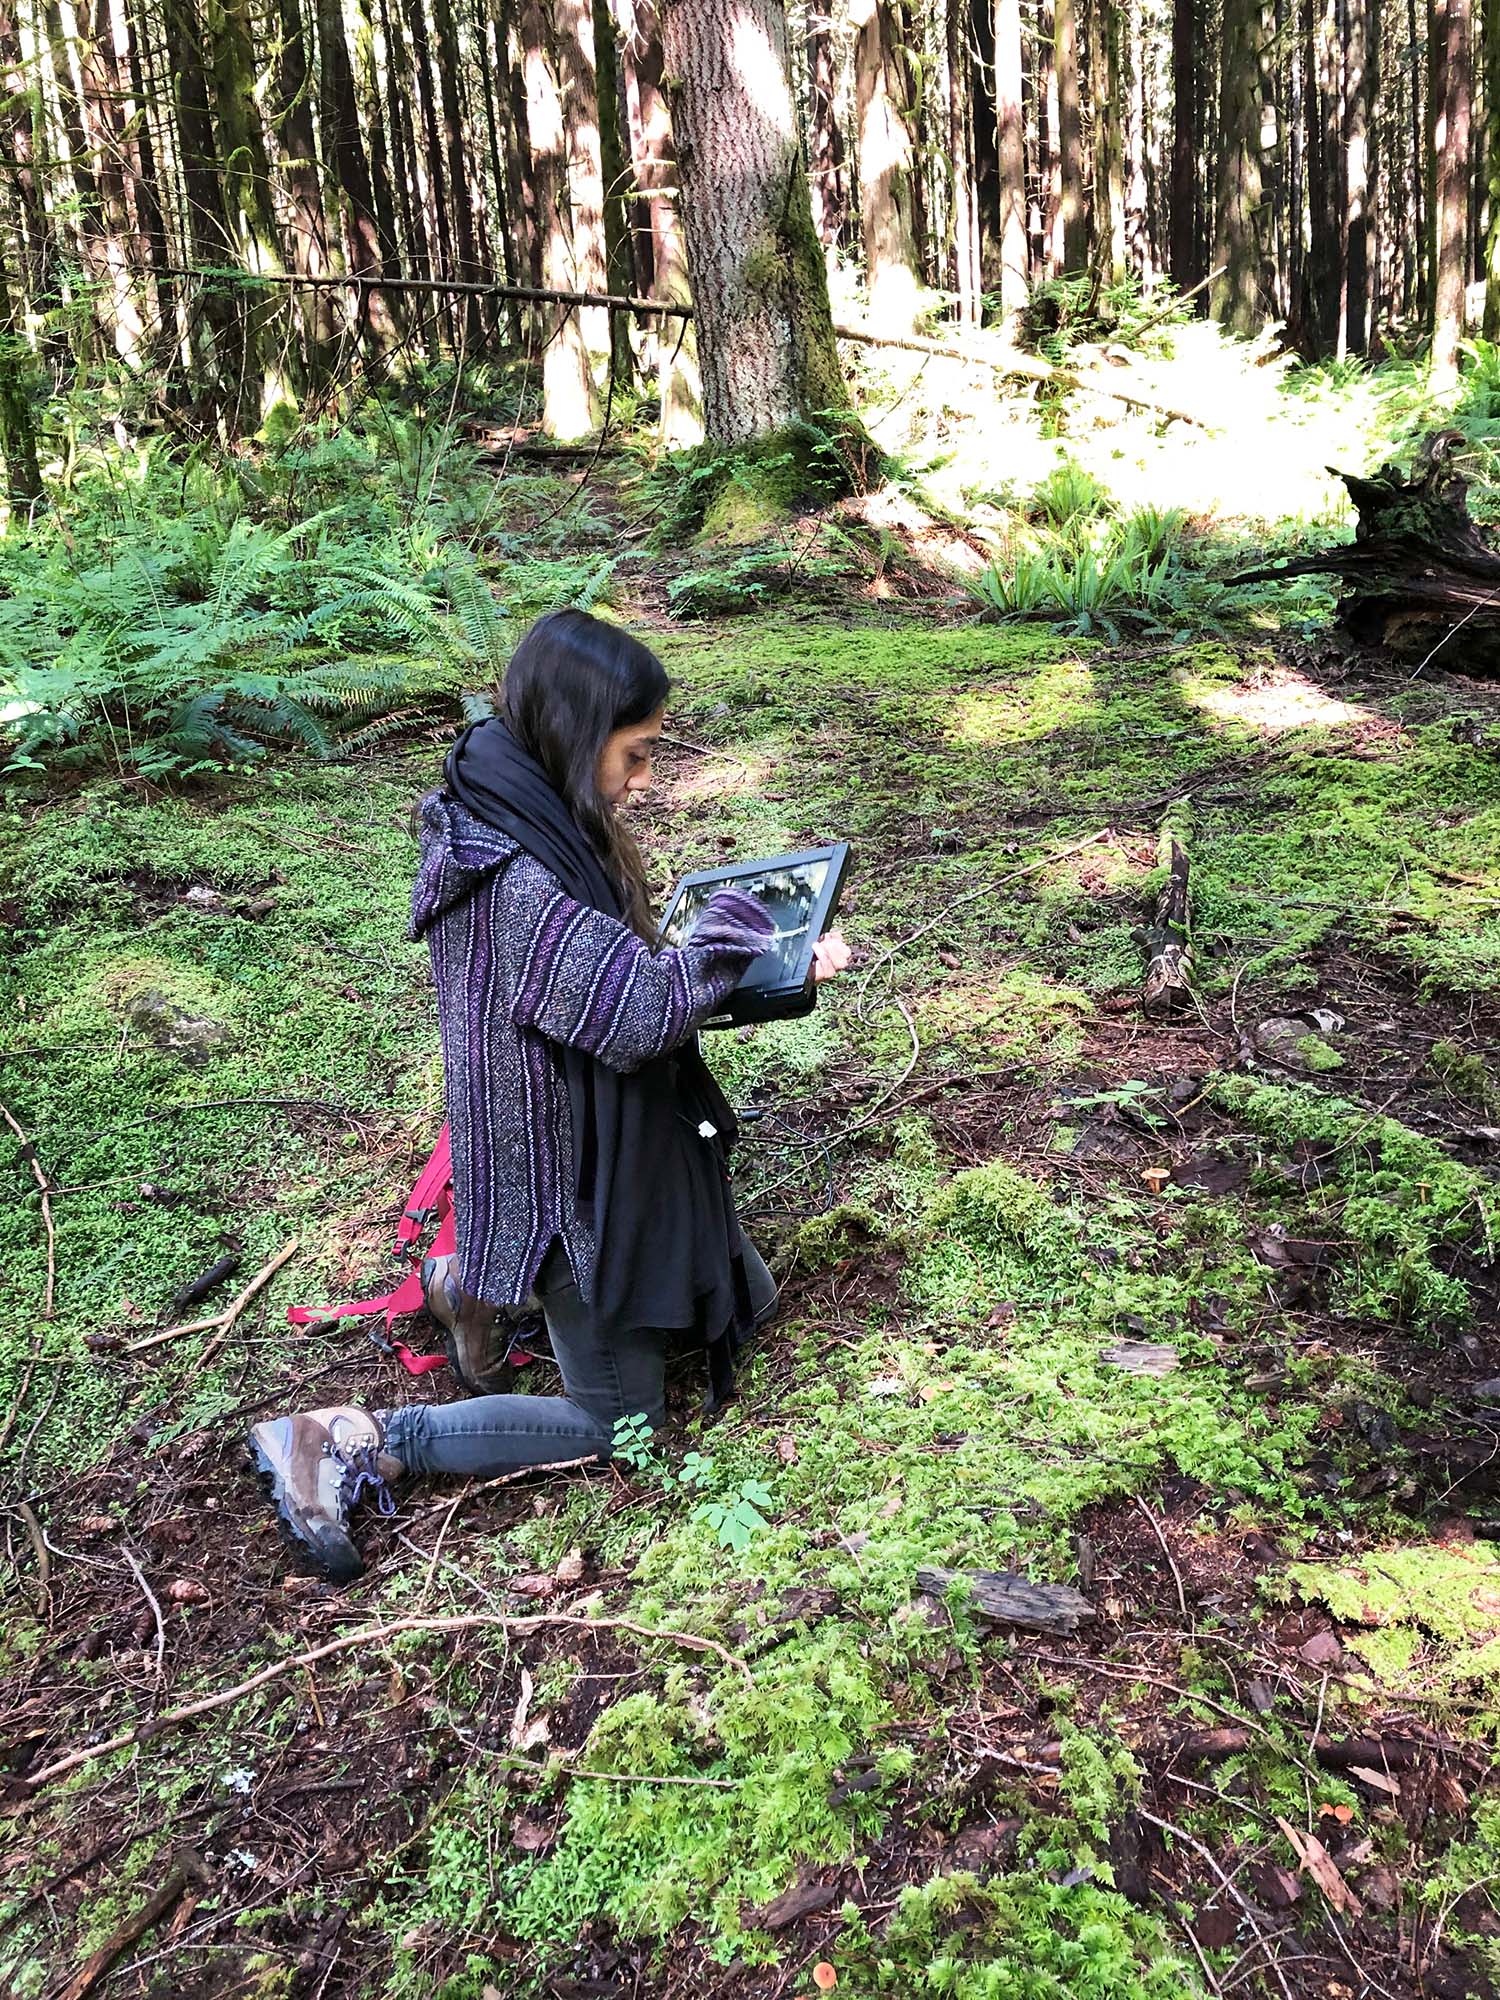 A person kneeling on the forest floor holding a portable scanner